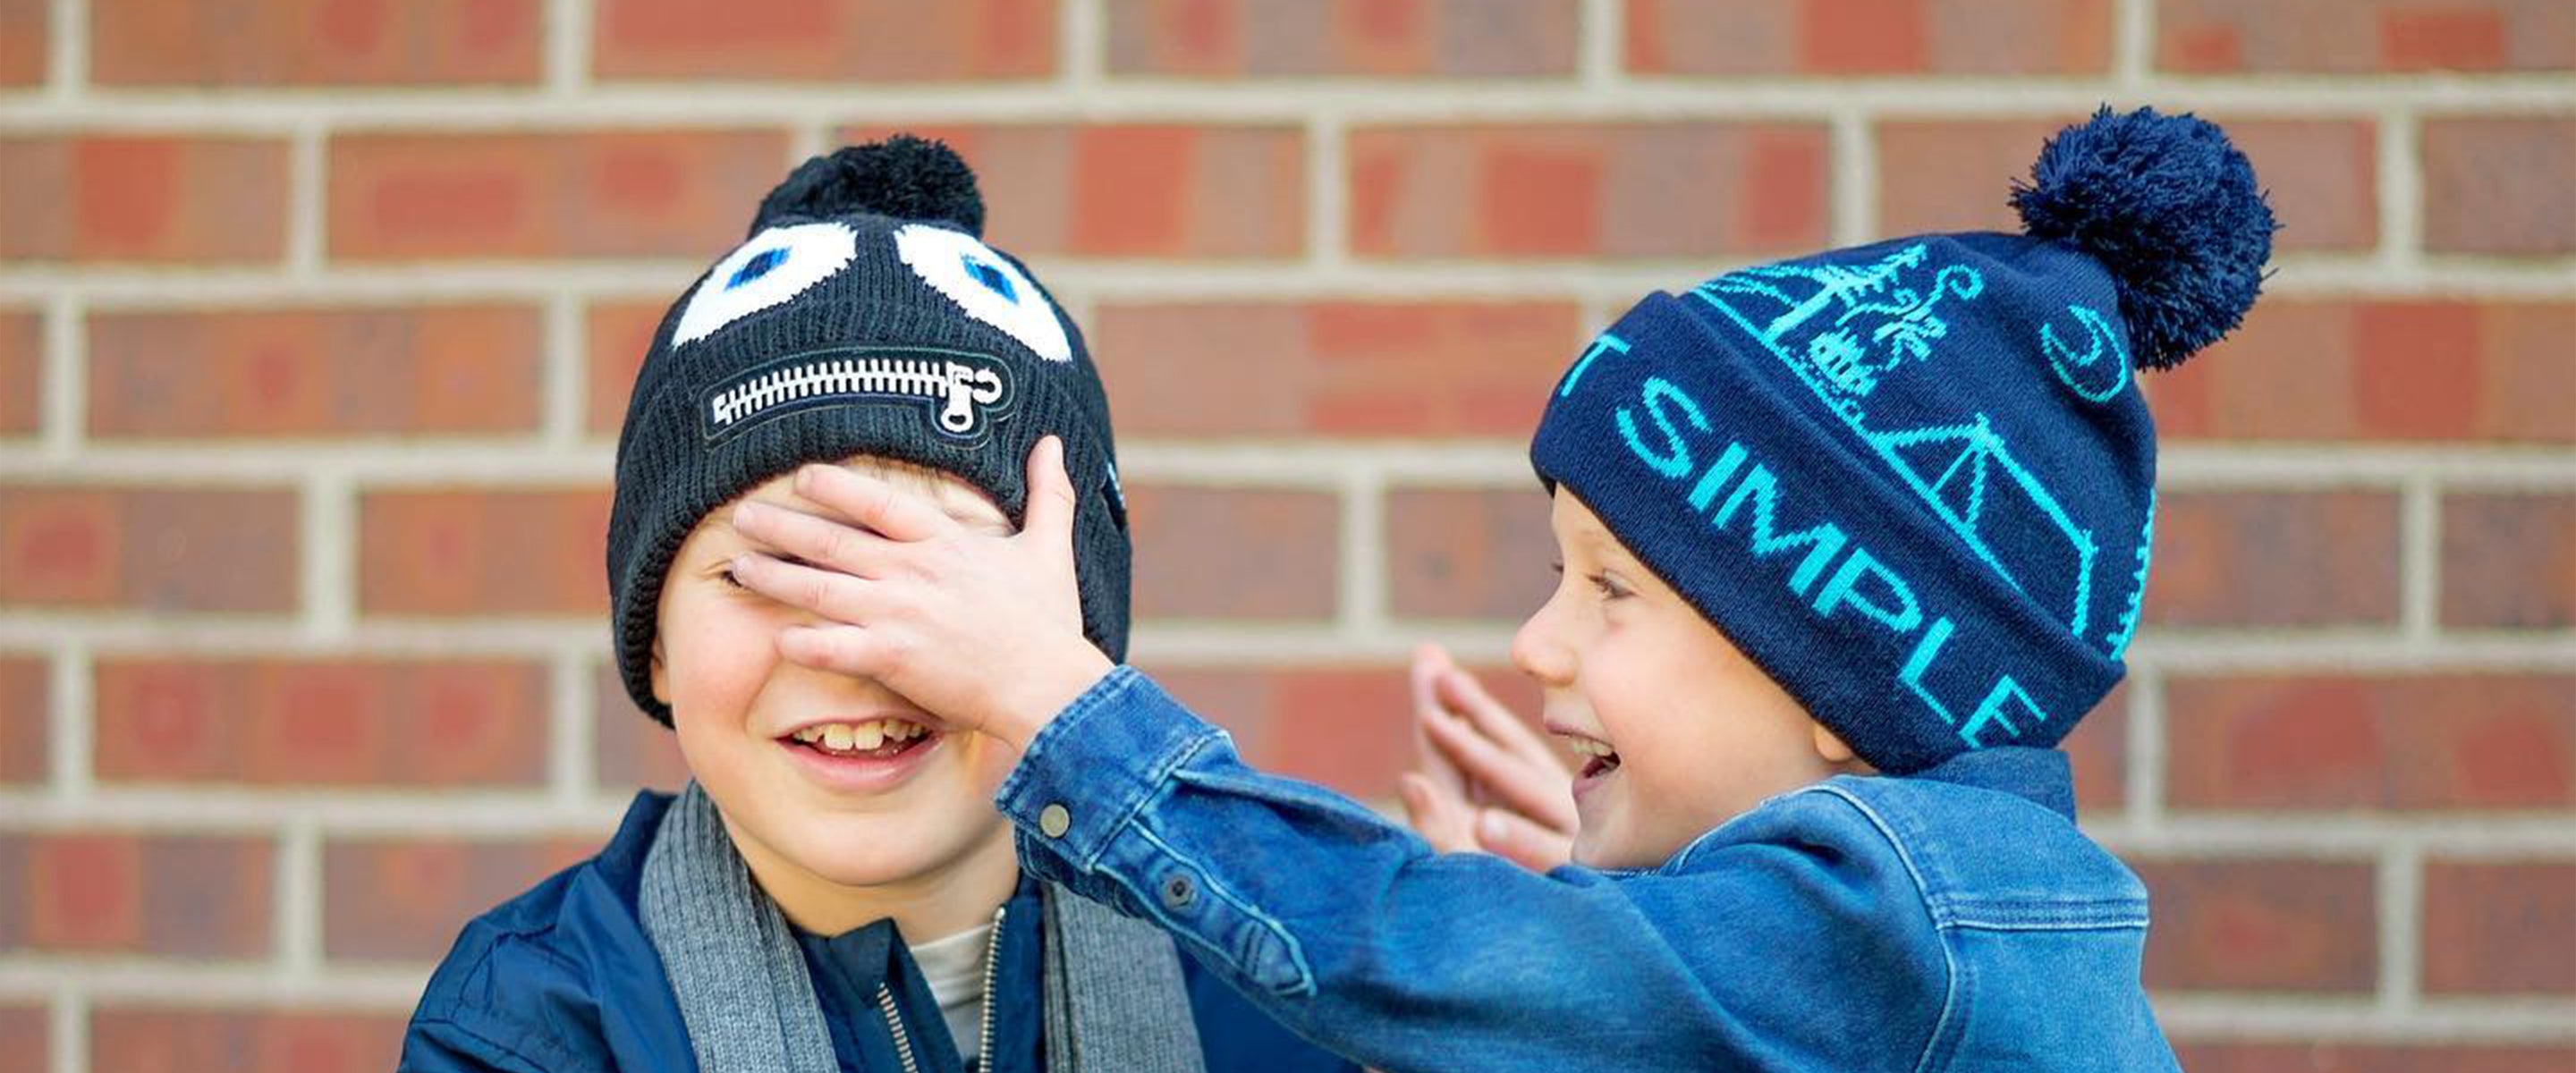 Bula - Neckwarmers and Beanies for Kids – Oberson